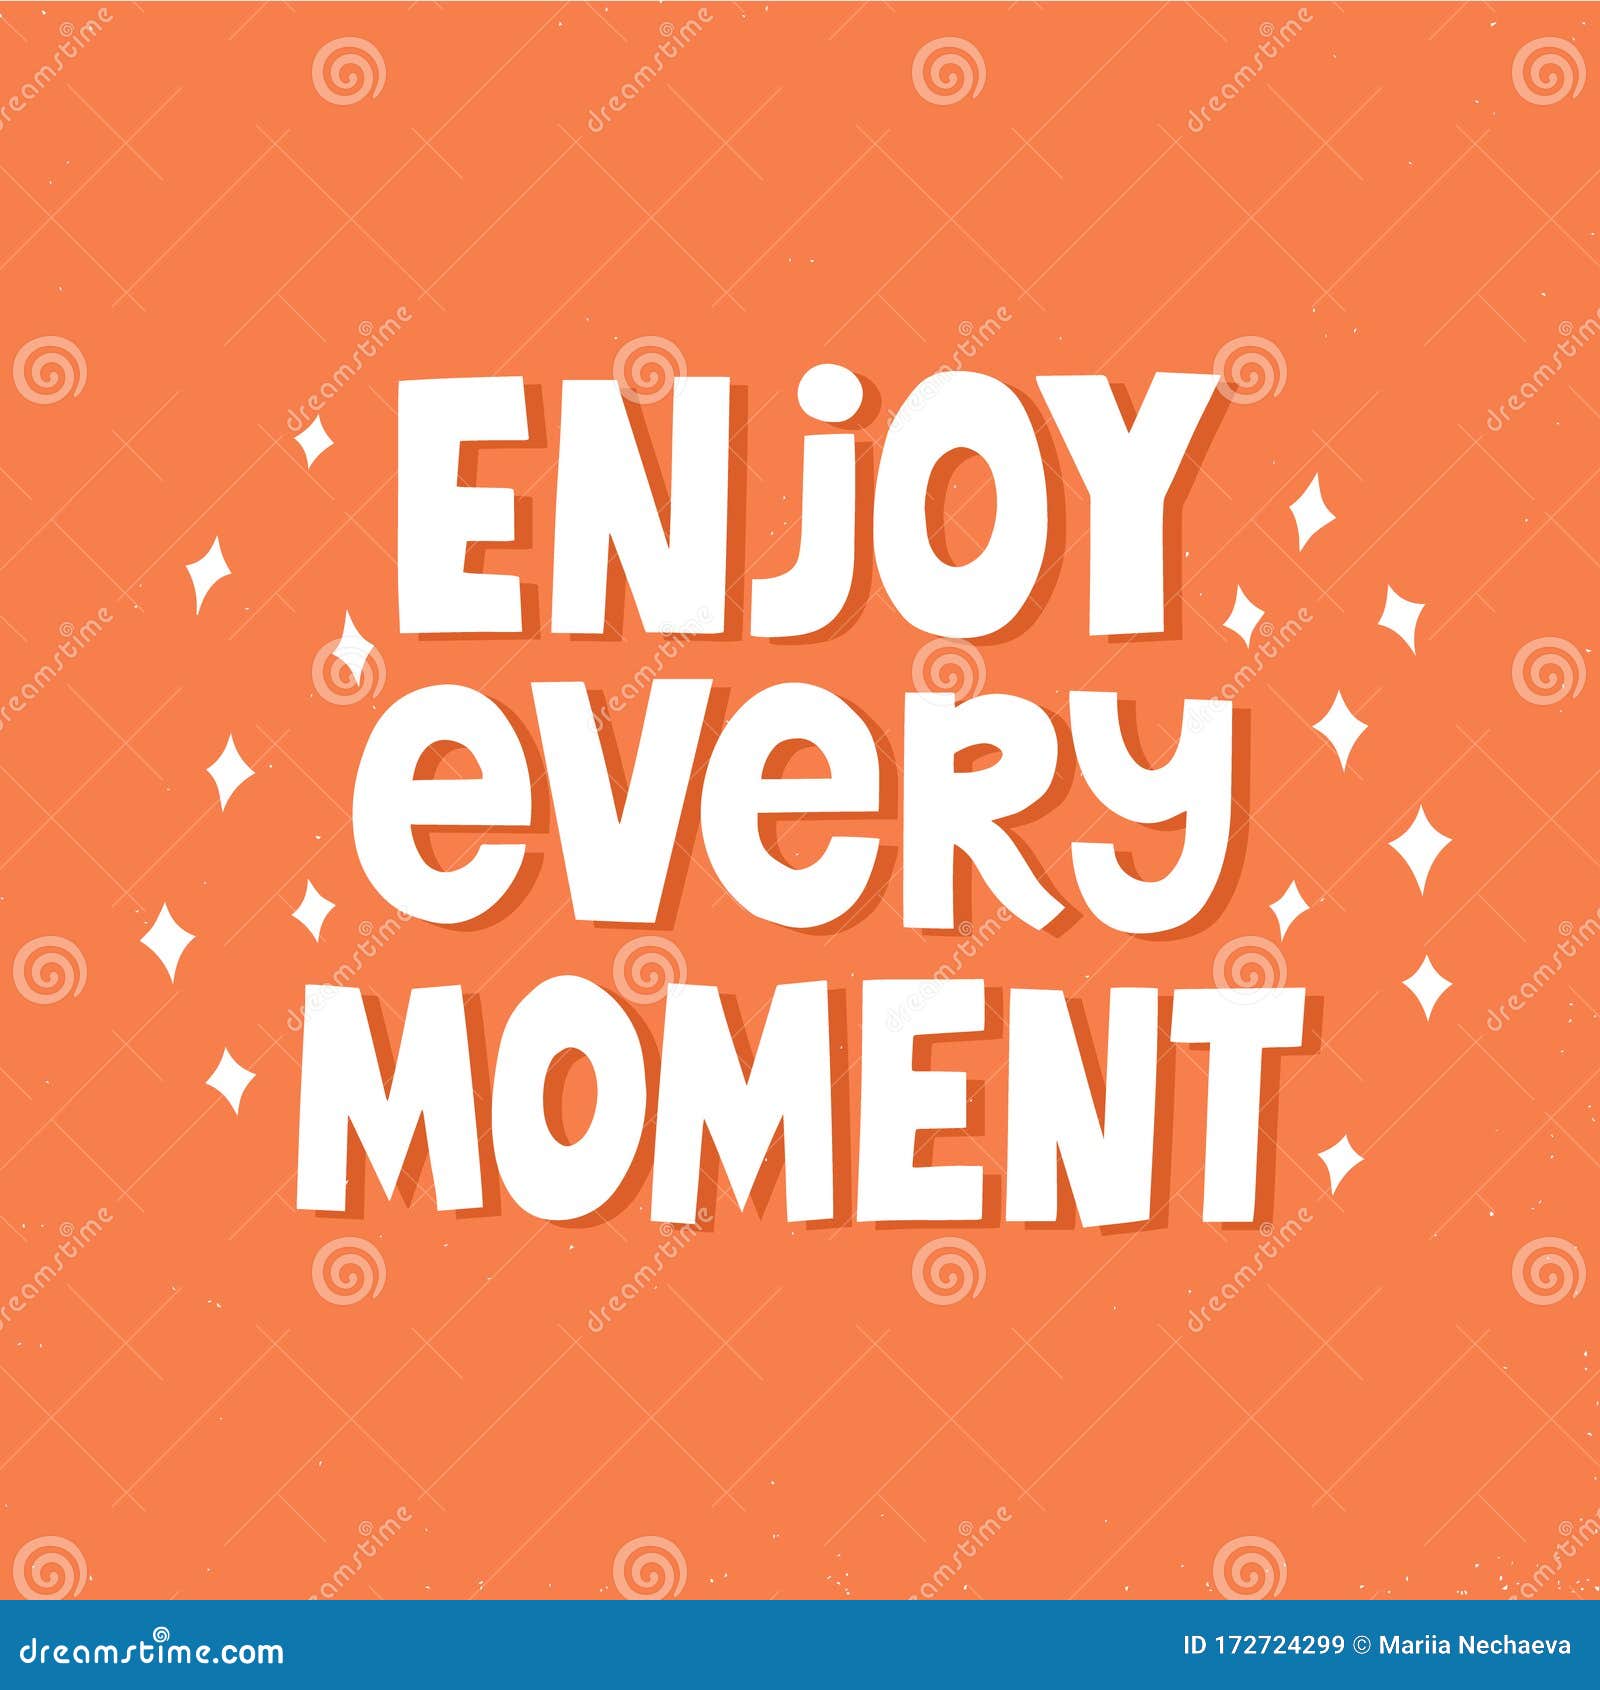 Enjoy every moment quote stock illustration. Illustration of ...